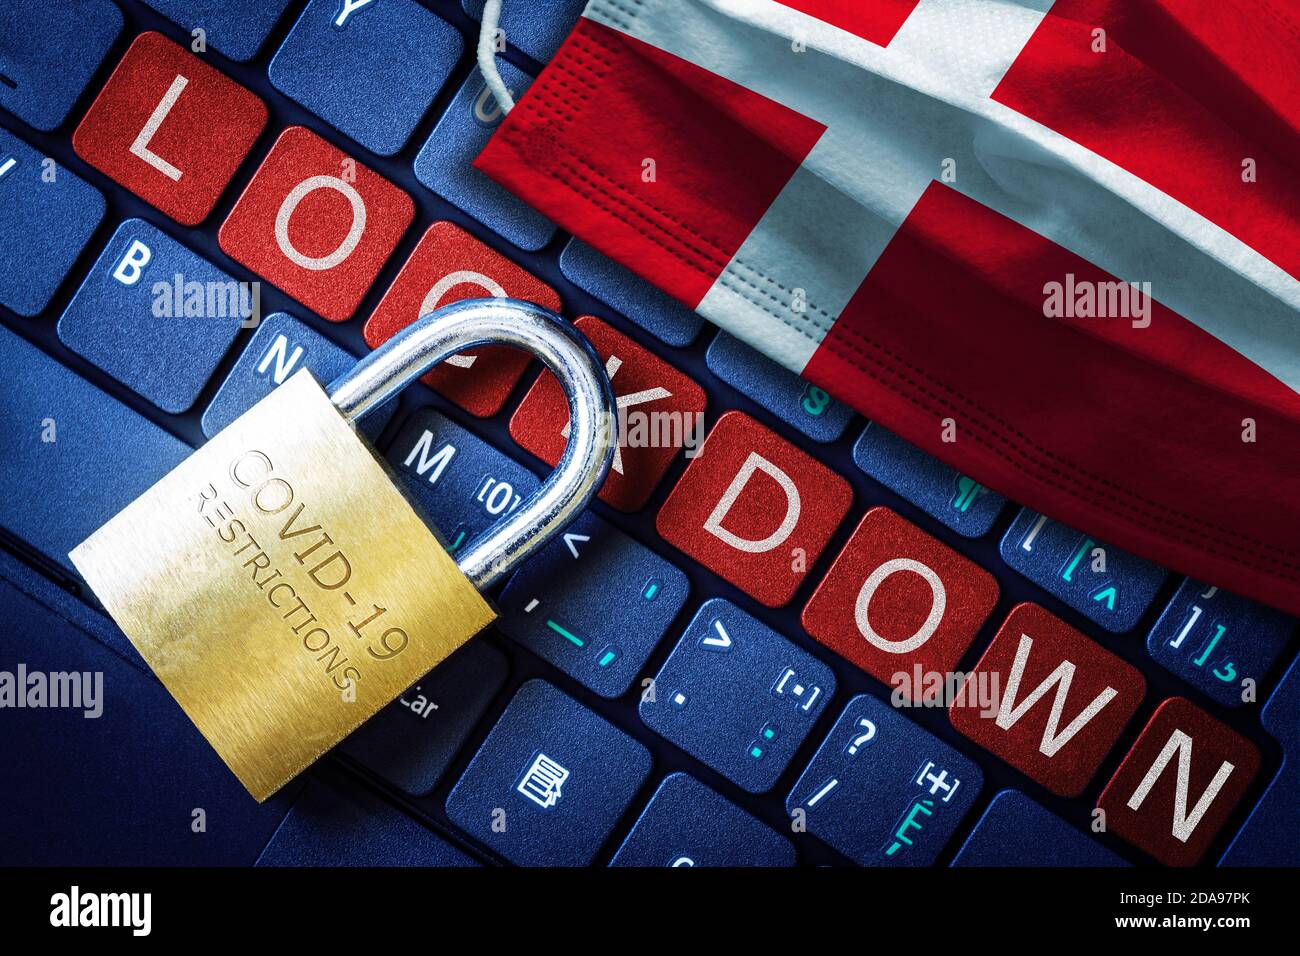 Denmark COVID-19 coronavirus lockdown restrictions concept illustrated by padlock on laptop red alert keyboard buttons and face mask with Danish flag. Stock Photo